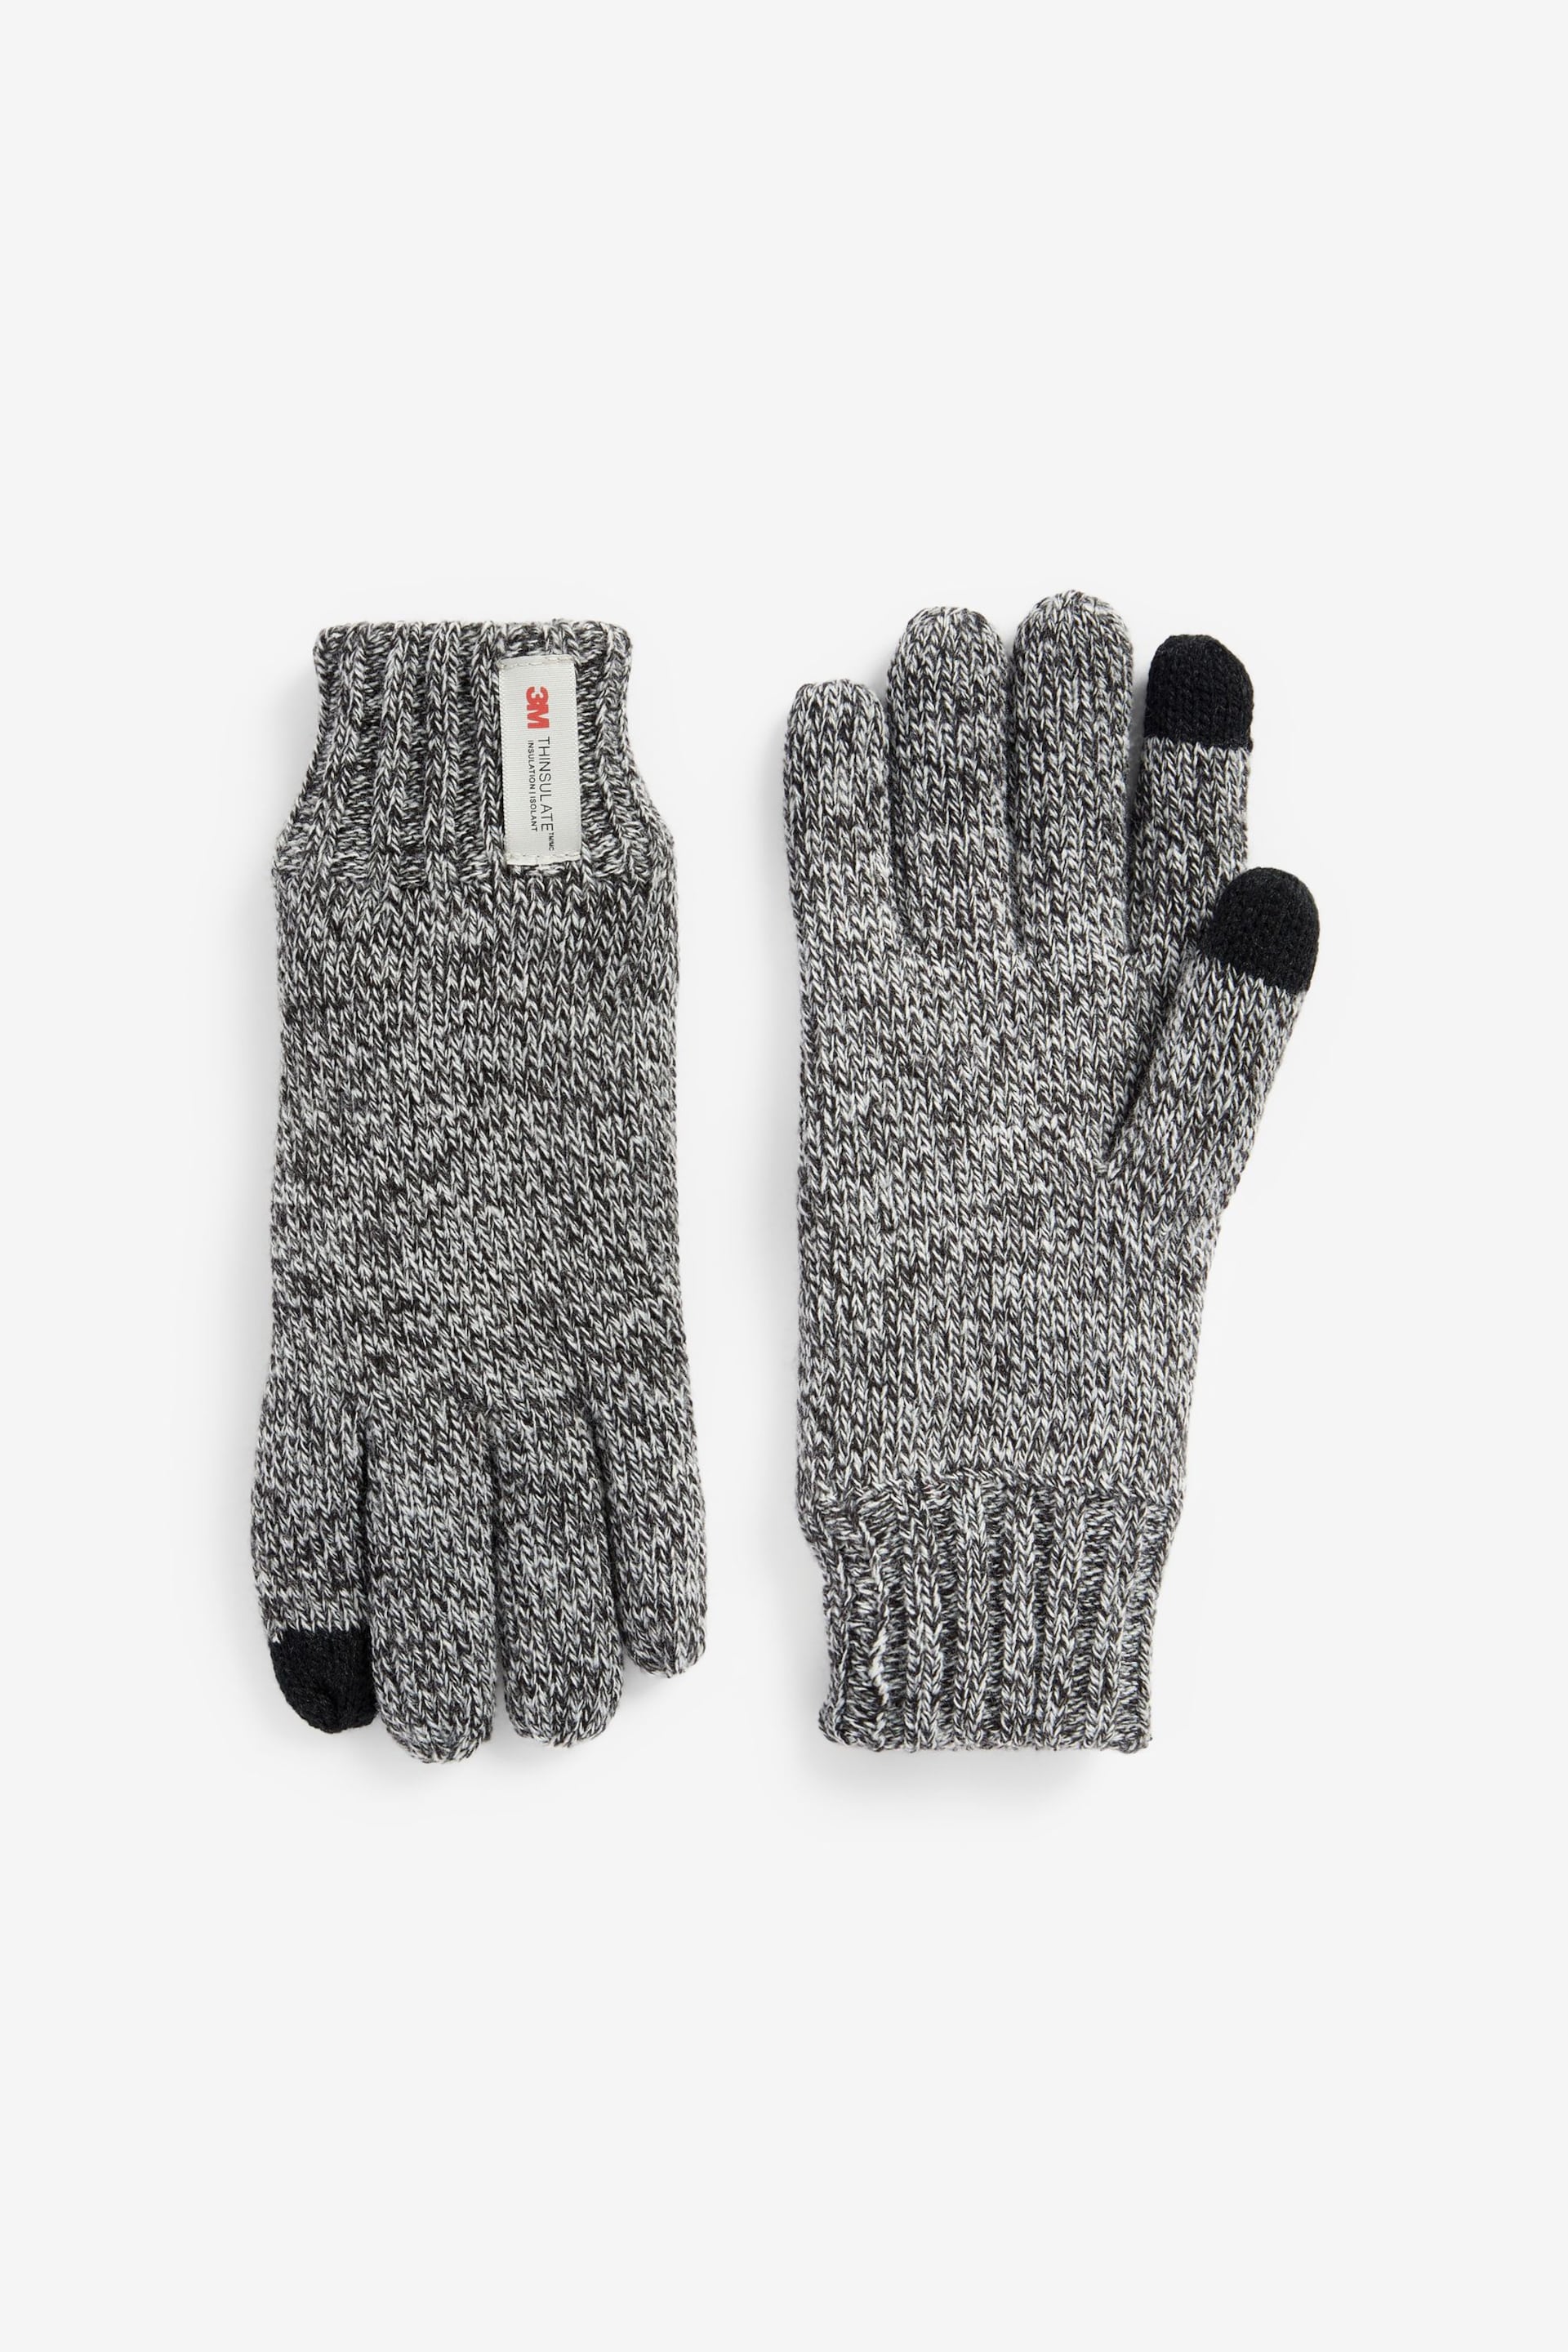 Grey Thinsulate Gloves - Image 3 of 4